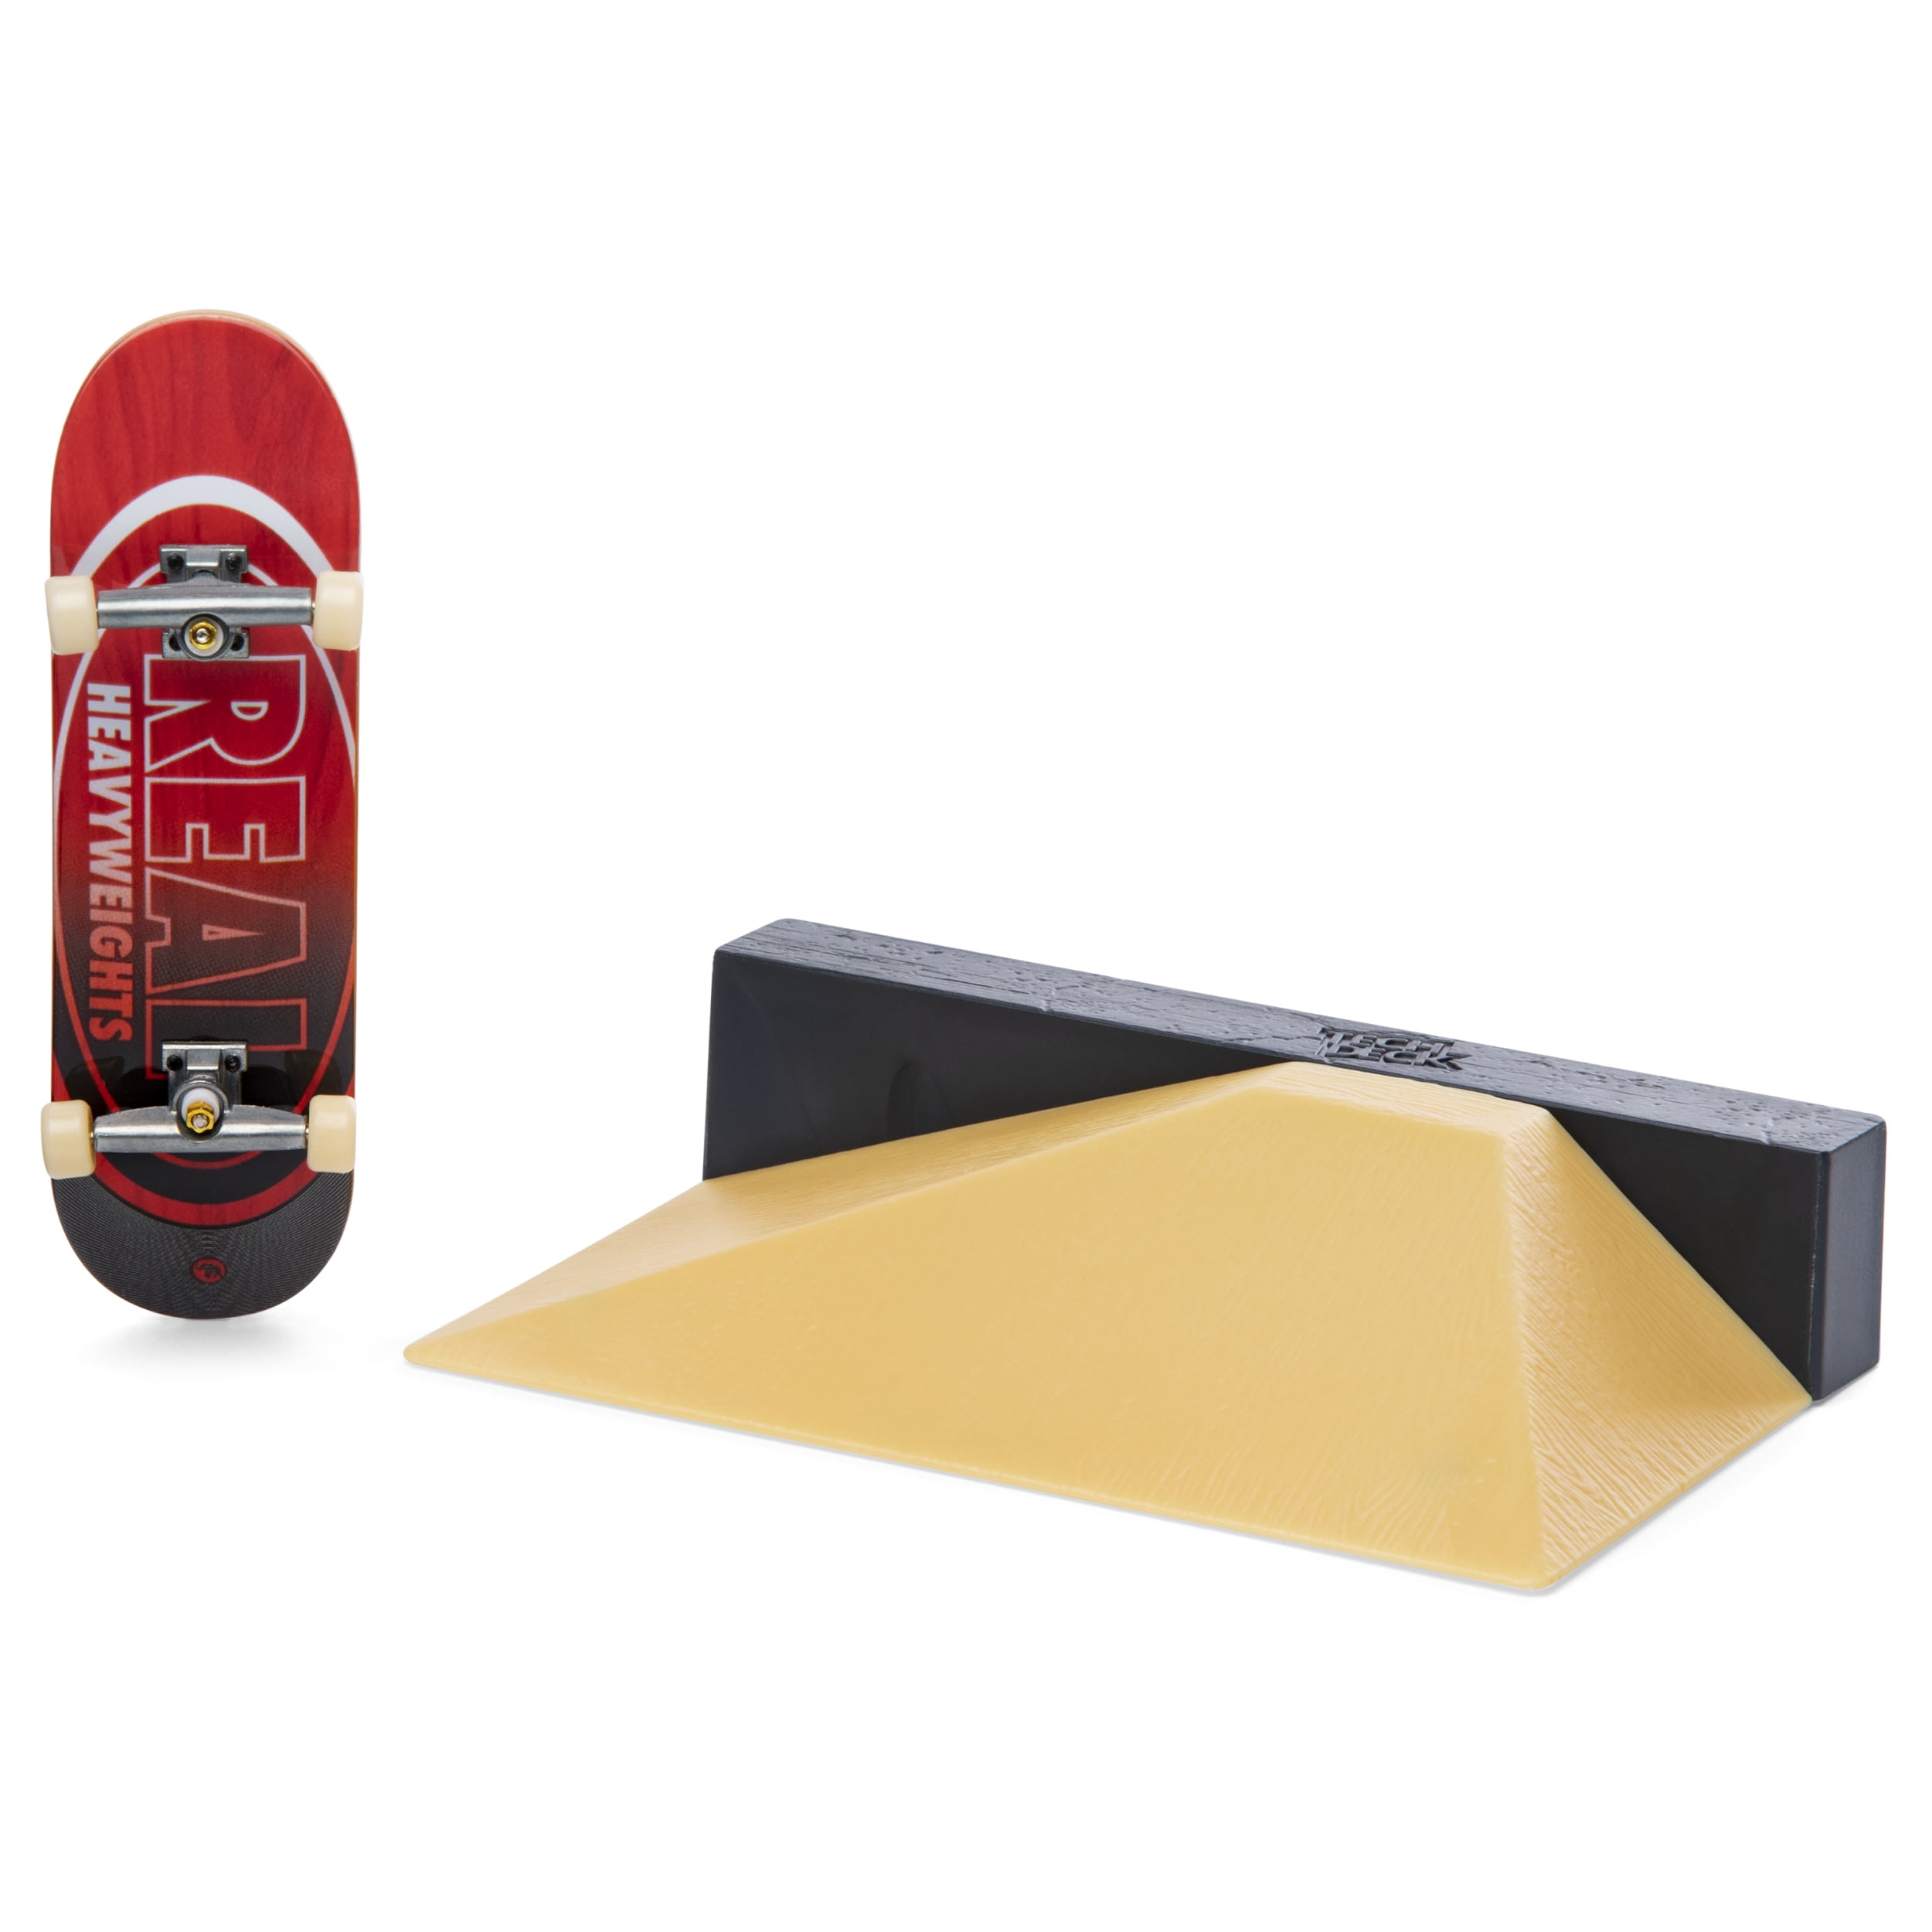 2020 Tech Deck Street Hits Blind Skate Fingerboard Obstacle Picnic Table for sale online